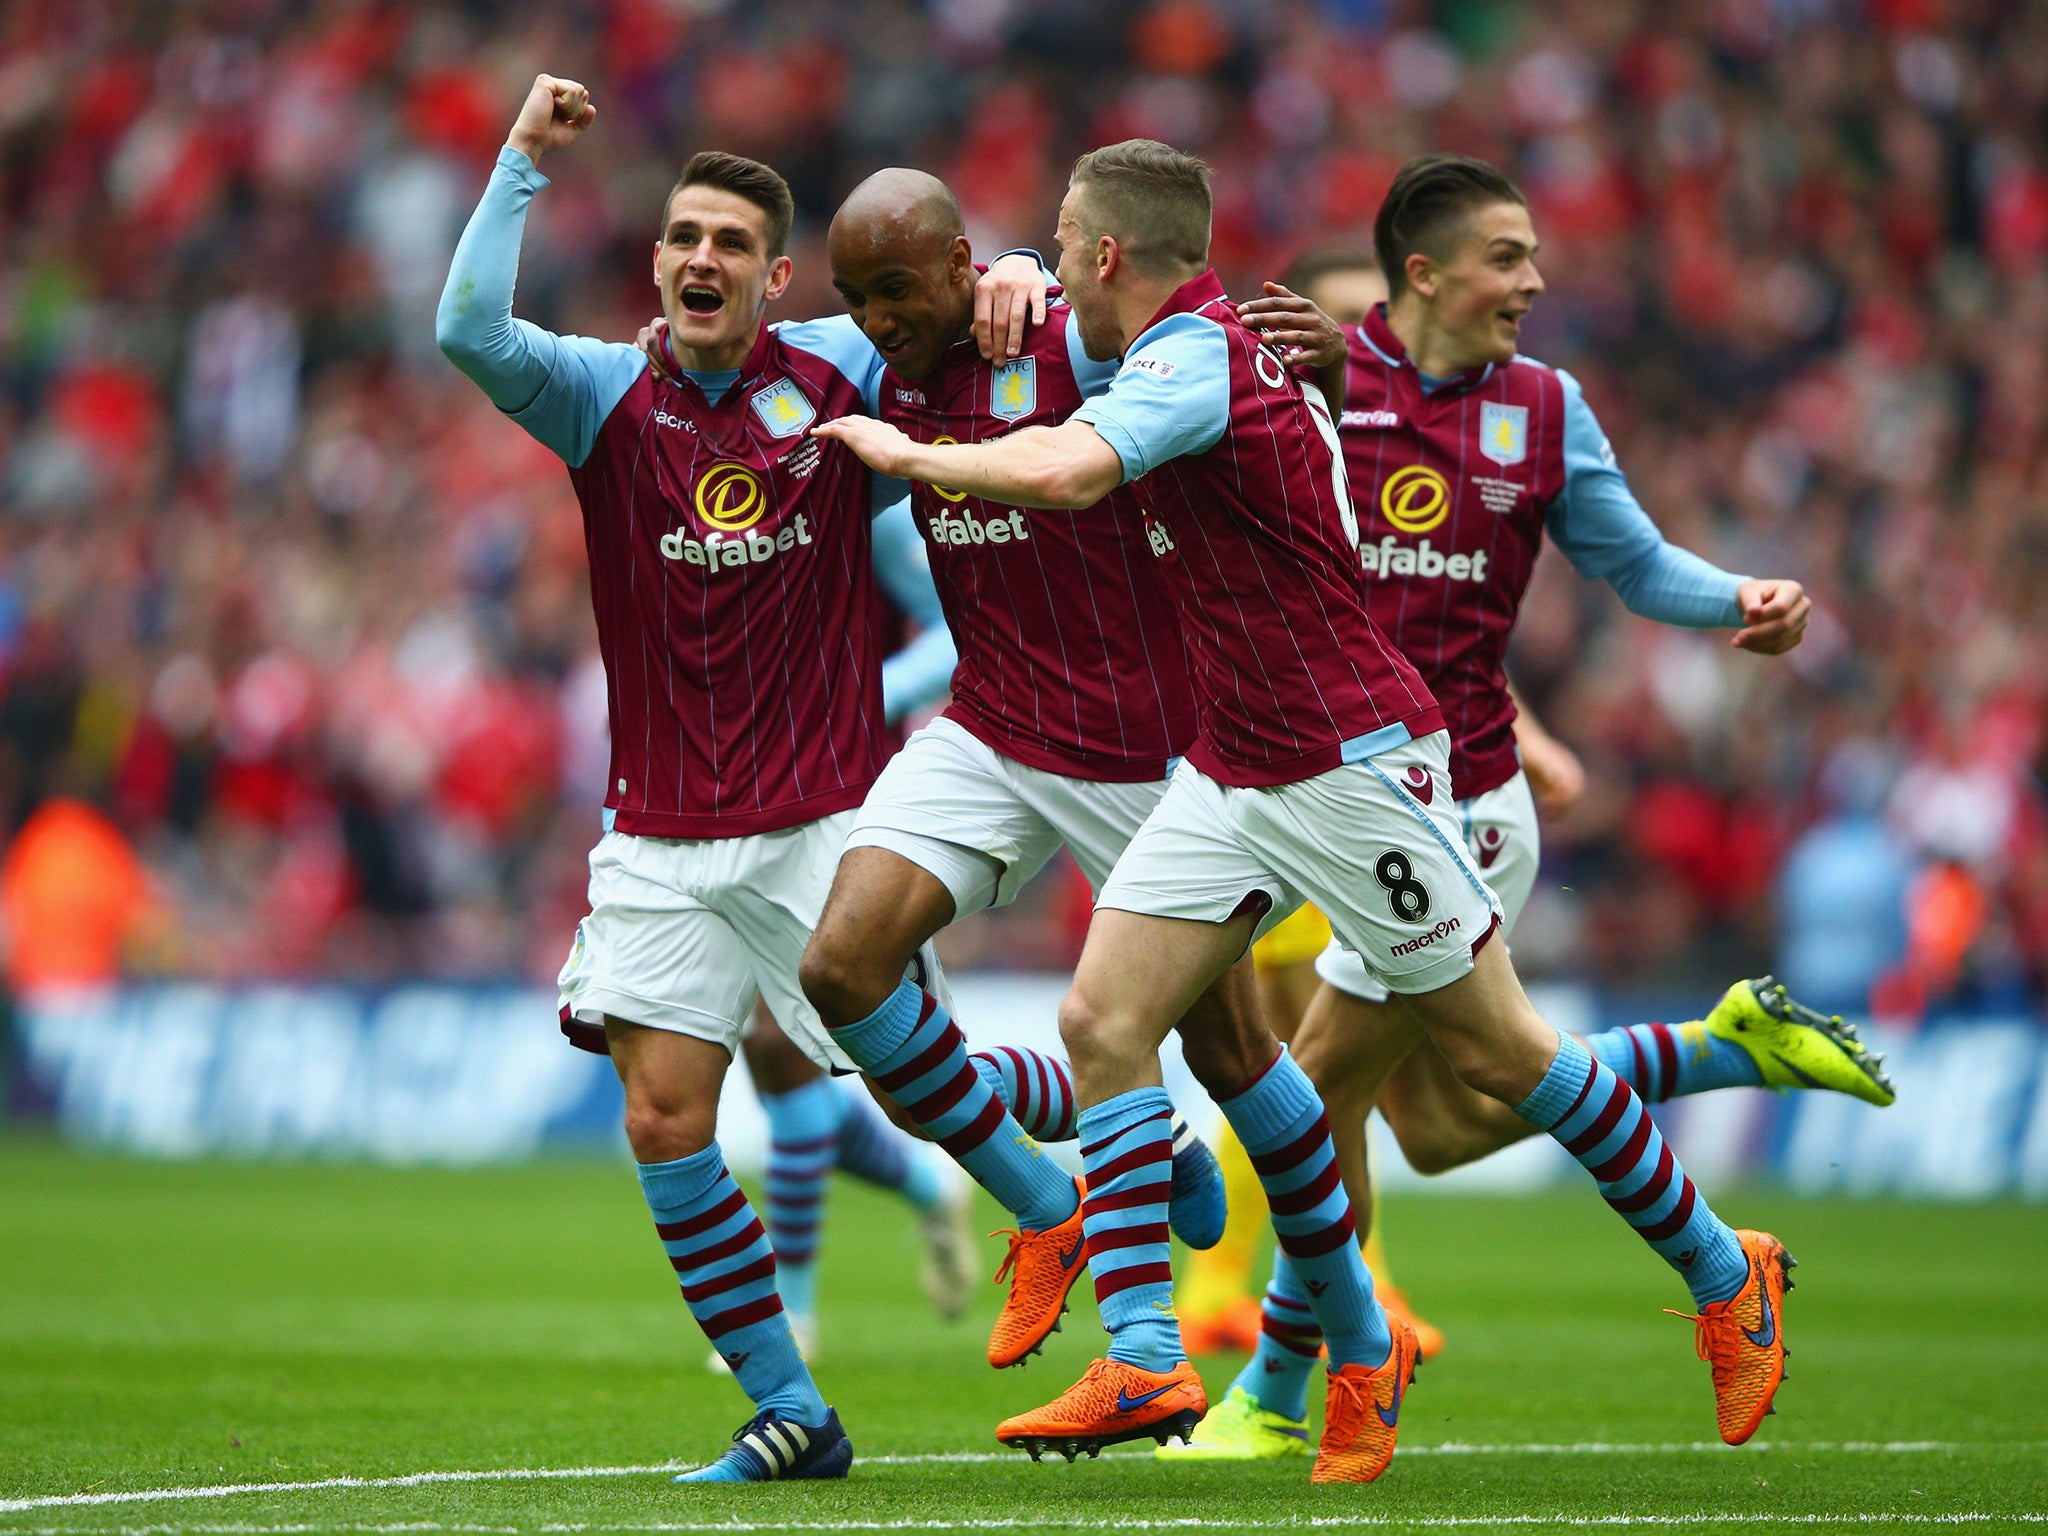 Villa beat Liverpool to reach the FA Cup final